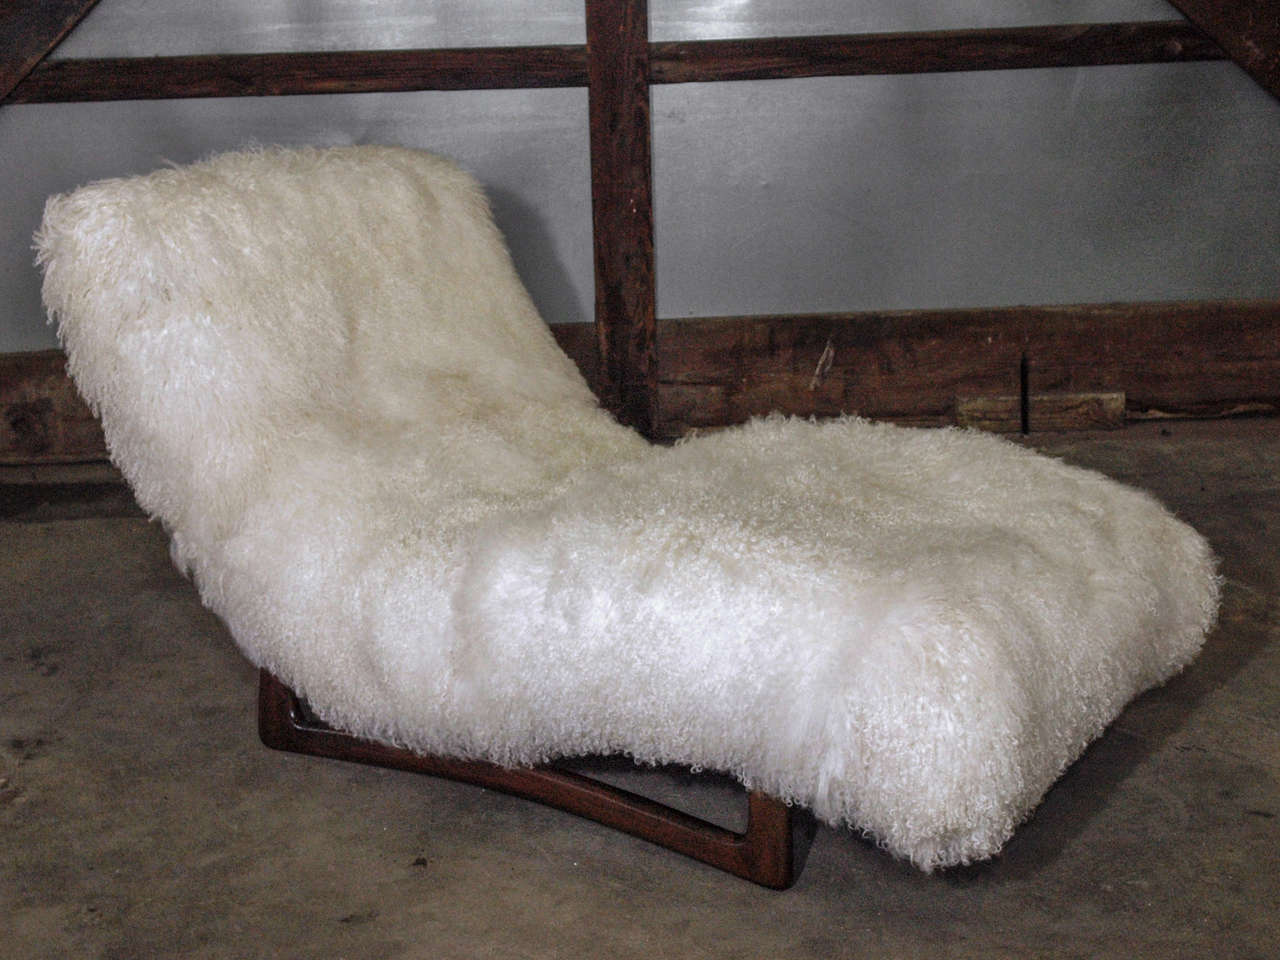 Elegant, curved Chaise Lounge with sculptural walnut base by Adrian Pearsall for Craft Associates. Excellent restored condition and newly upholstered in soft, silky and luxurious Mongolian goat hair on hide from my own country of Argentina.  Ideal